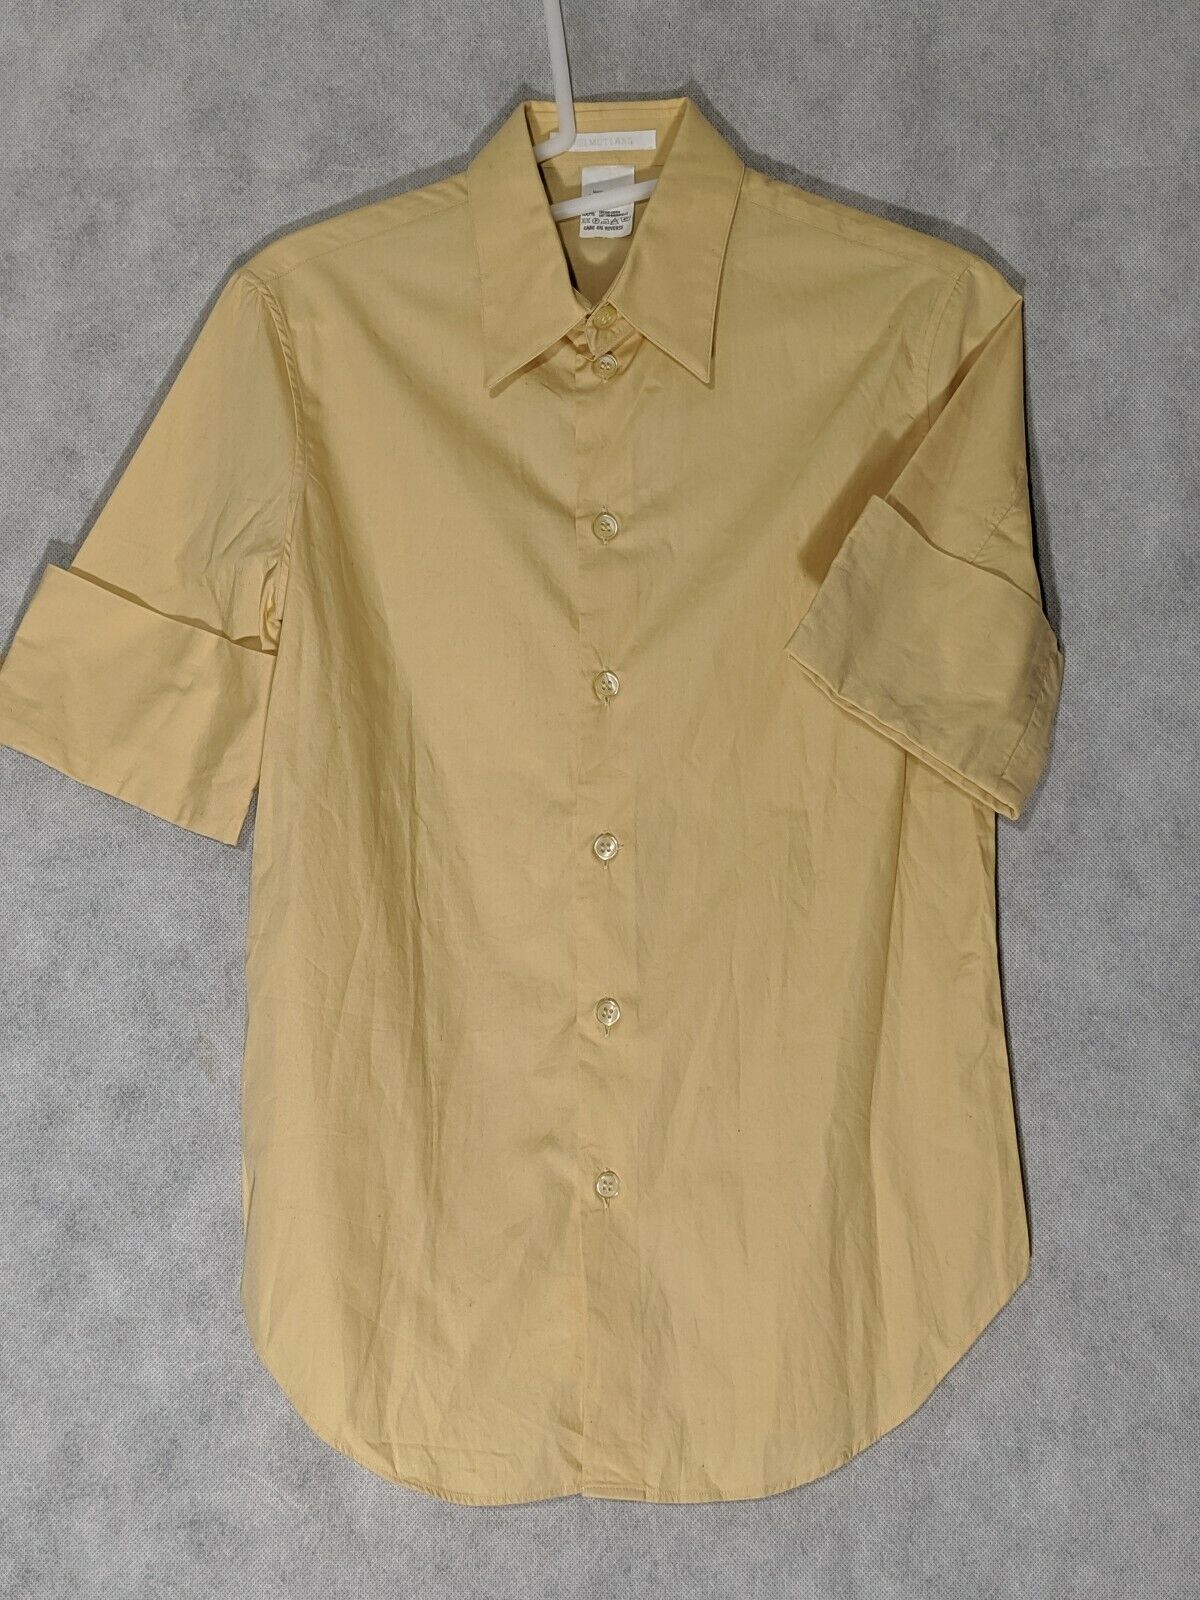 Helmut Lang Archive Vintage Roll Cuff Button Up Shirt 38 Italy